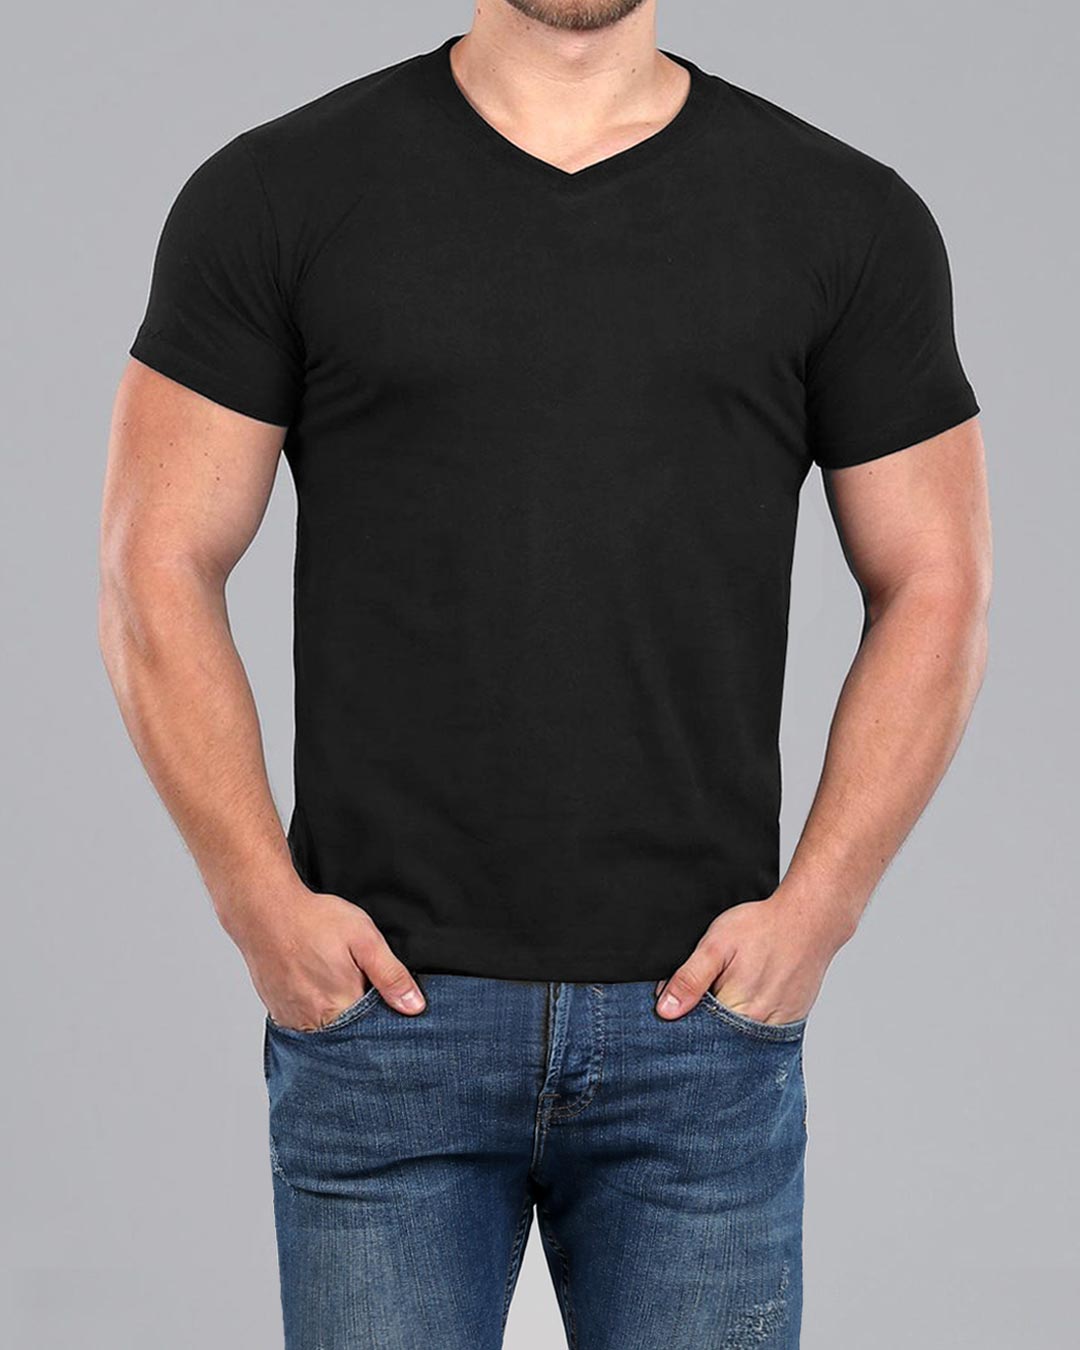 fitted black tee